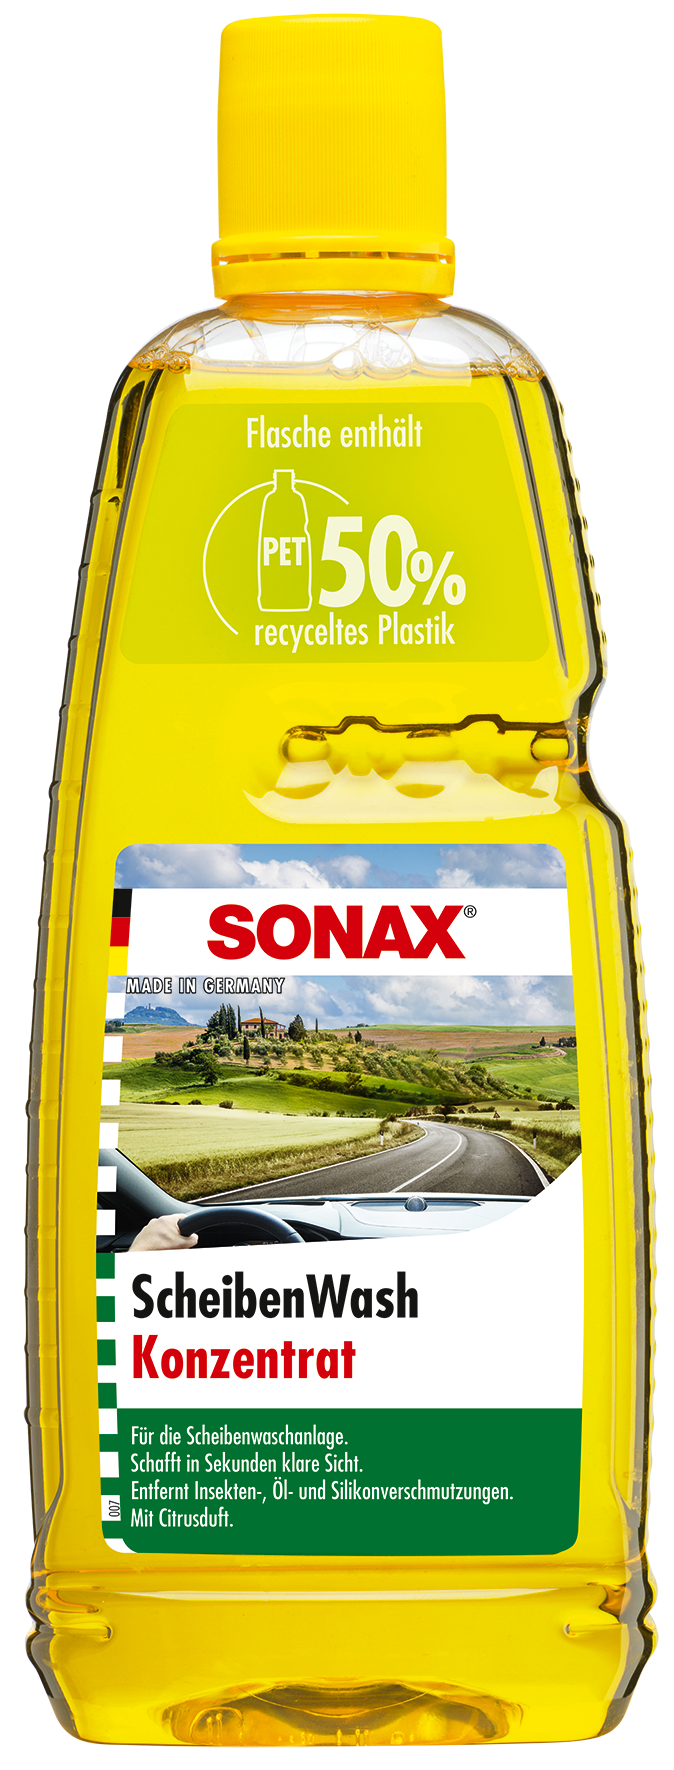 Product image download - SONAX Media - site 2